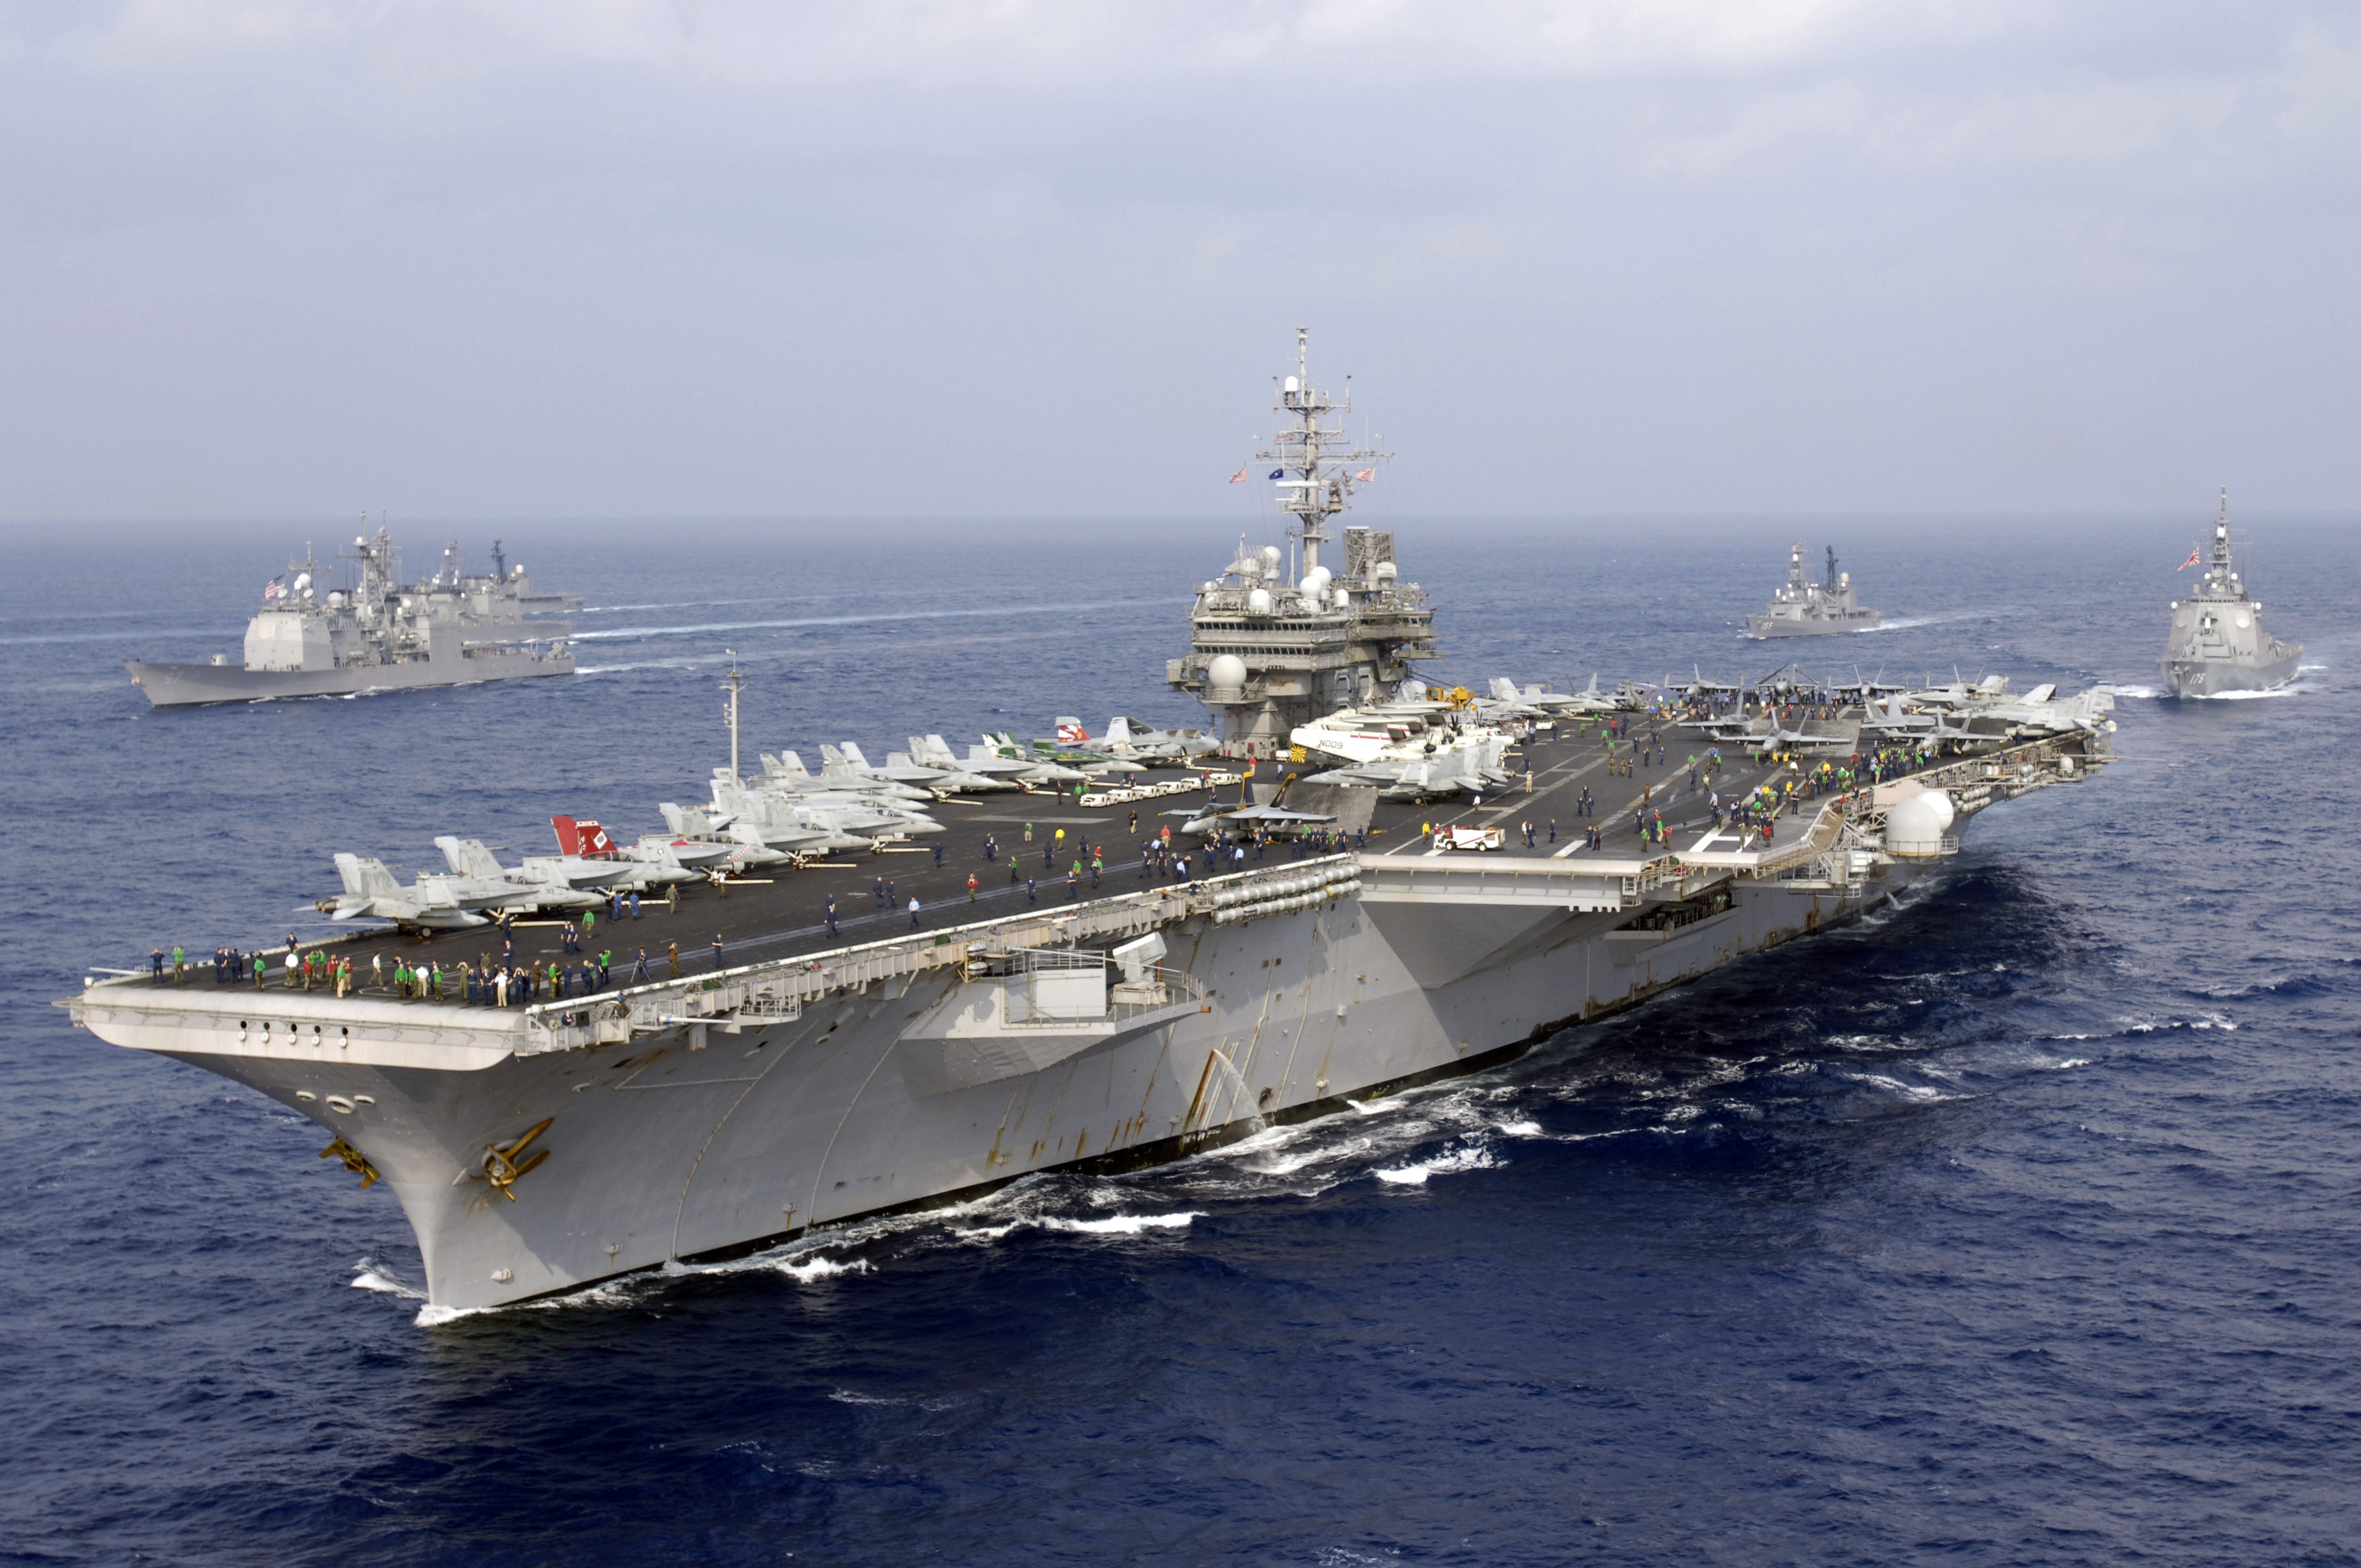 US_Navy_071116-N-7883G-101_The_aircraft_carrier_USS_Kitty_Hawk_%28CV_63%29_and_other_American_and_Japan_Maritime_Self-Defense_Forces_%28JMSDF%29_ships_transit_together_at_the_end_of_ANNUALEX_19G%2C_the_maritime_component_of_the_U.S.-Japa.jpg